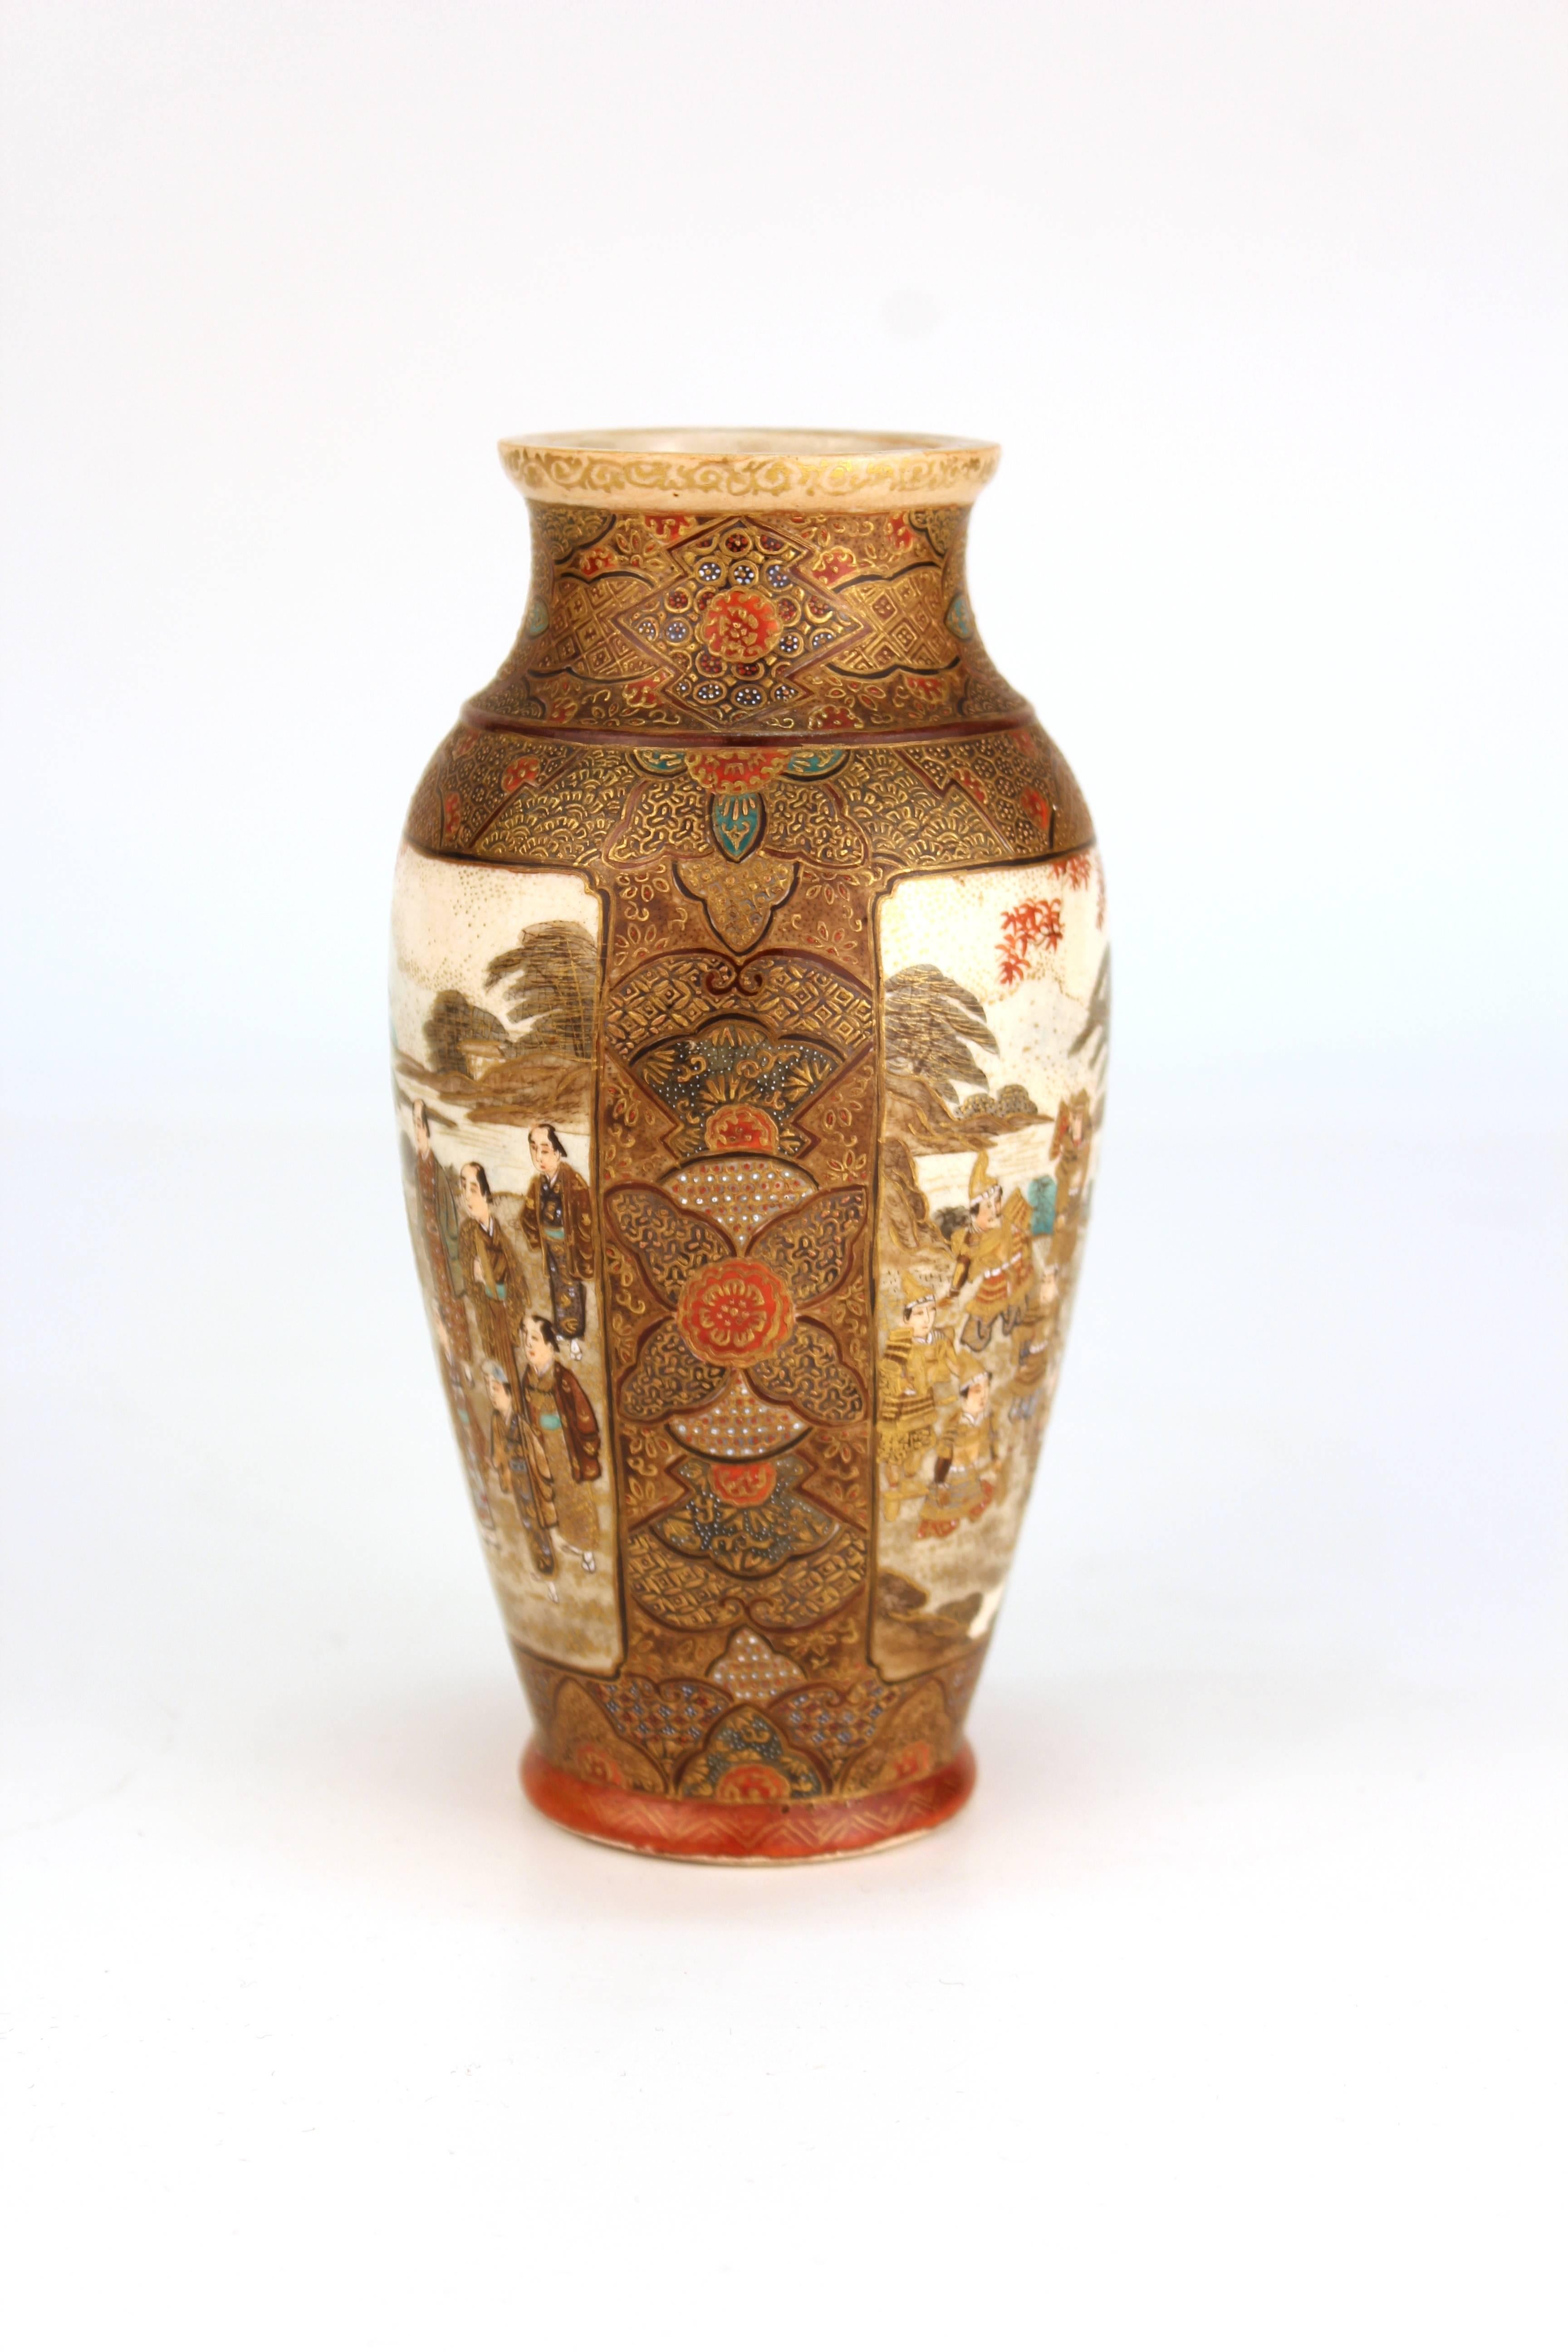 A Japanese Satsuma porcelain vase in baluster shape, depicting samurais and noblemen. The piece is in good vintage condition and has one fleabite chip to the rim.